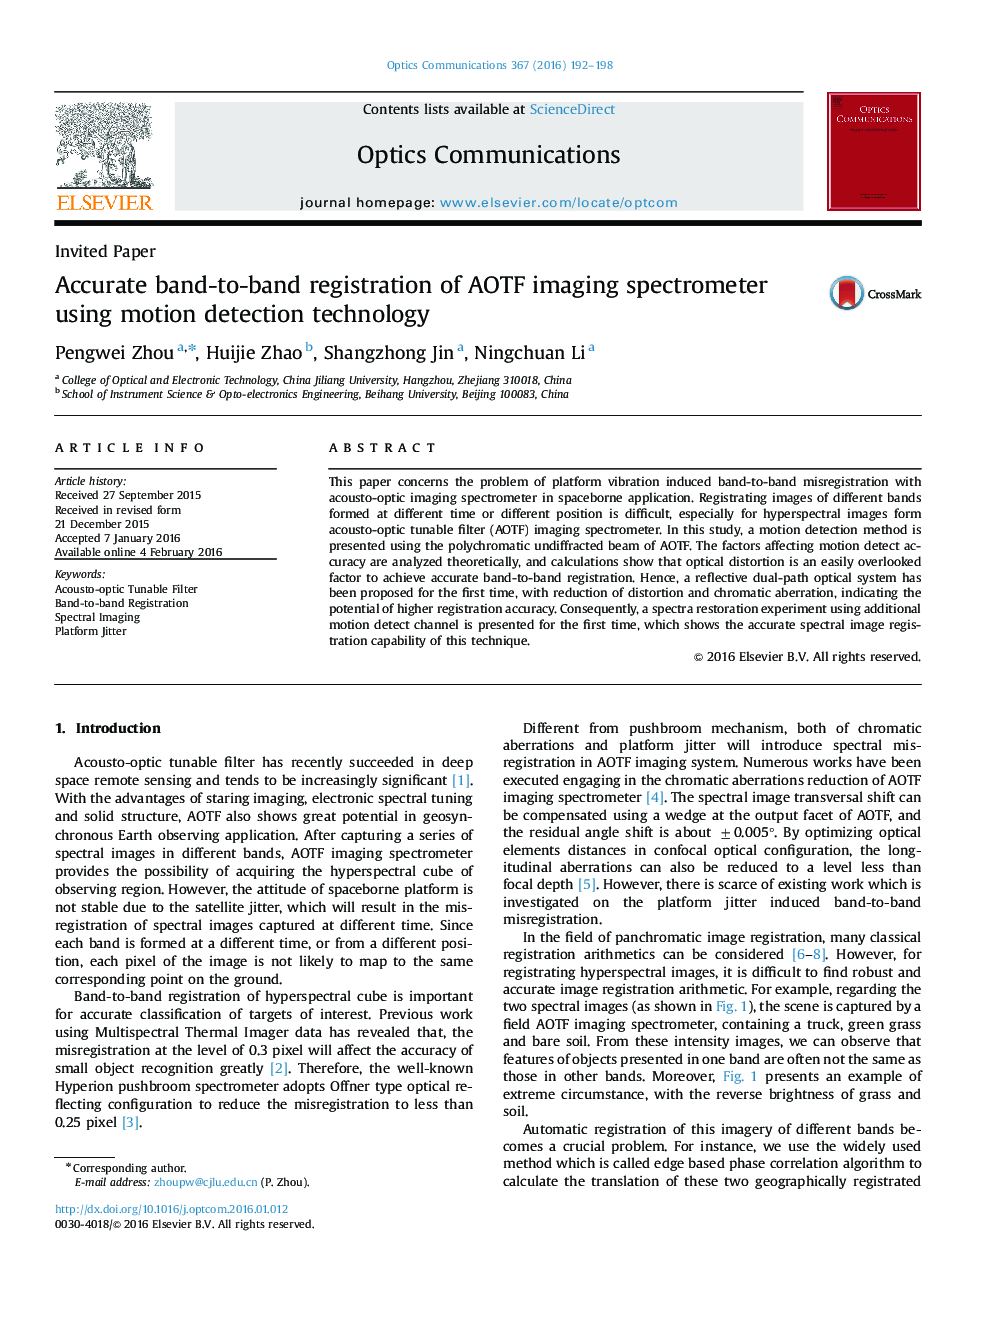 Accurate band-to-band registration of AOTF imaging spectrometer using motion detection technology